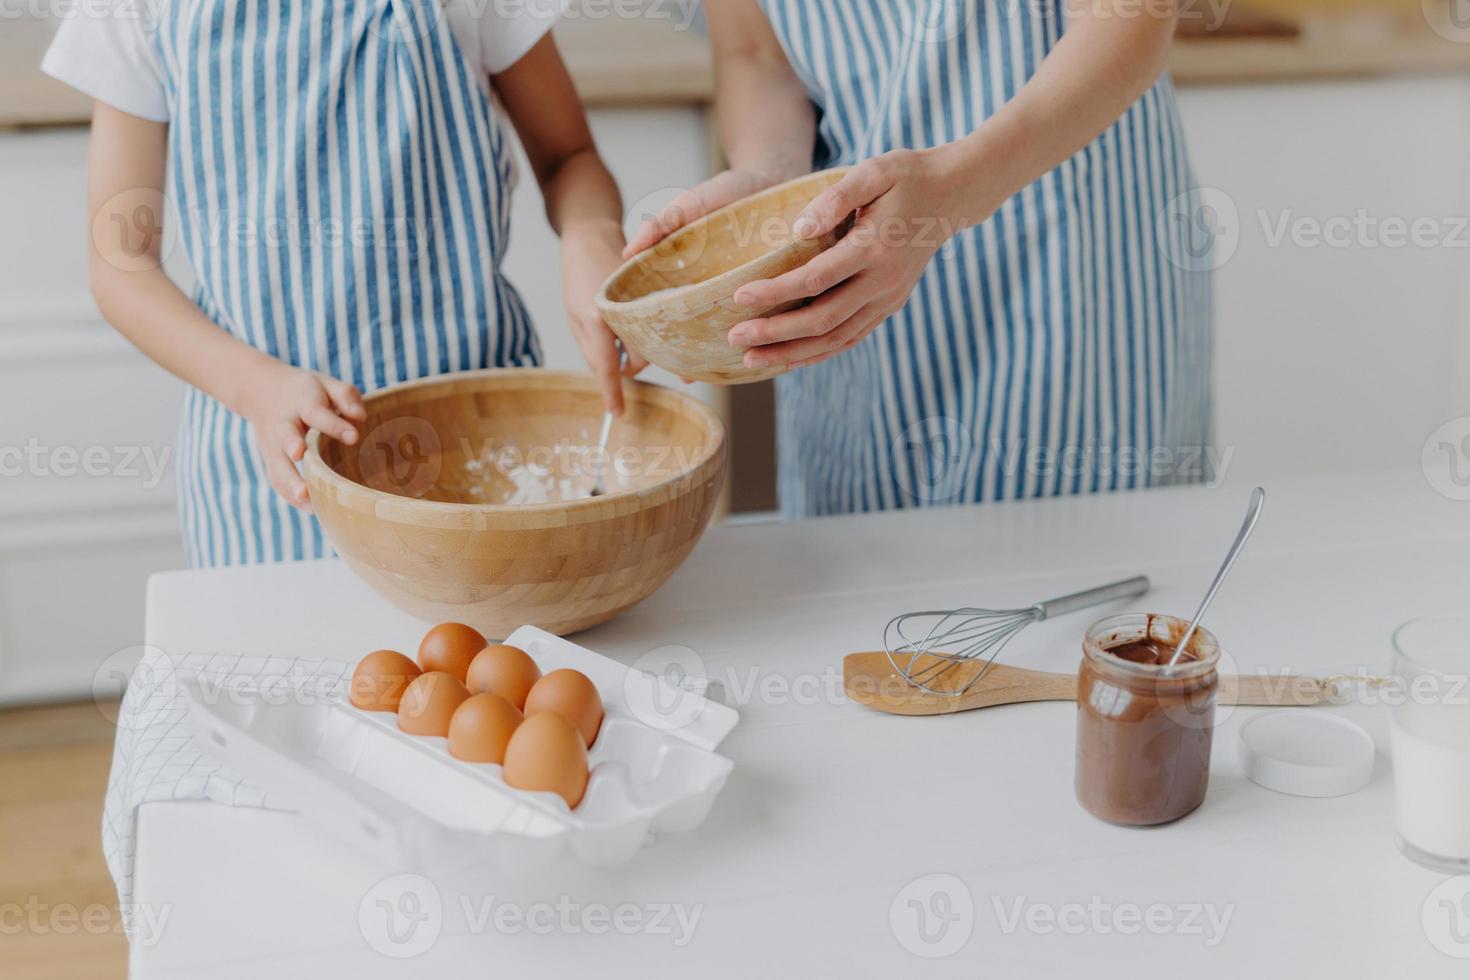 Cropped image of mothers and daughters hands mixing ingredients to prepare dough and bake tasty pastry, stand near kitchen table with eggs, melted chocolate in glass, wear striped blue aprons photo